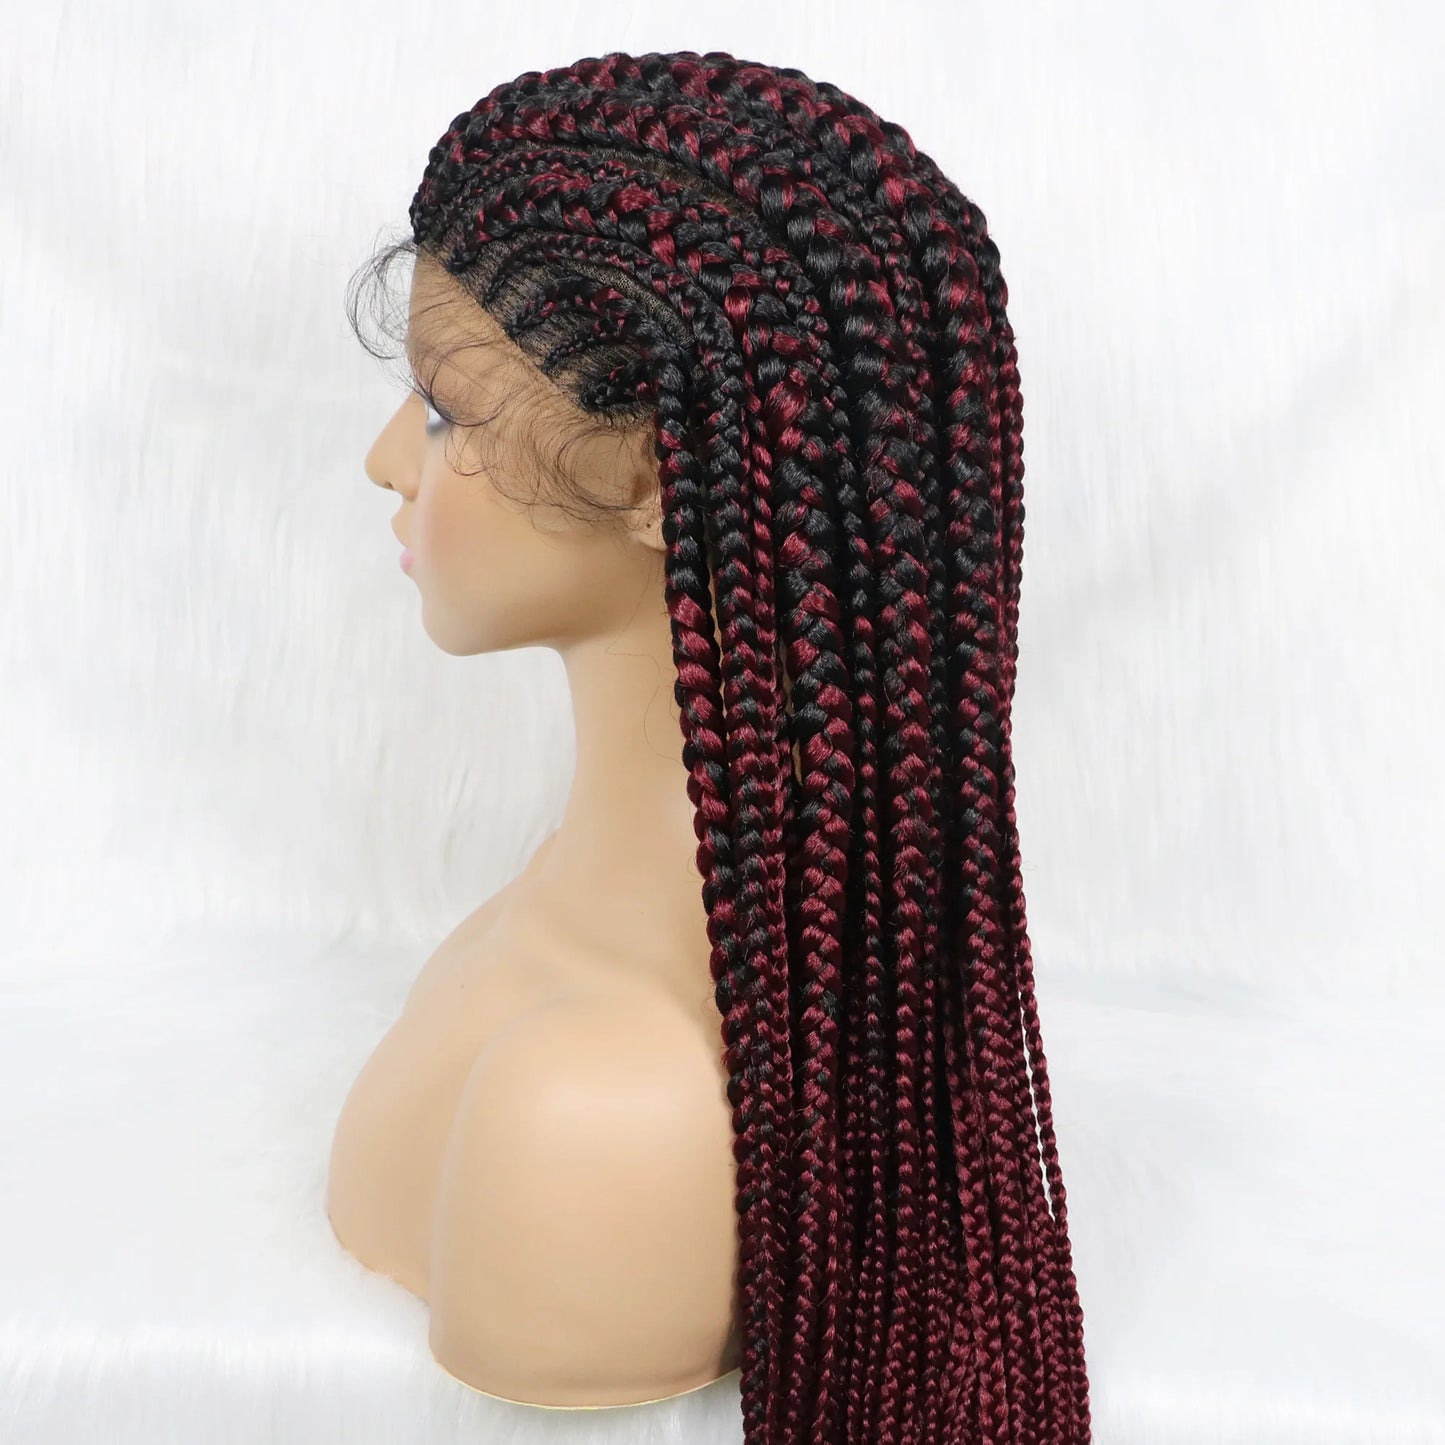 Lace Front Wig, Knotless Box Braided Wig With Baby Hair 36’‘ Lace Synthetic Braiding Hair